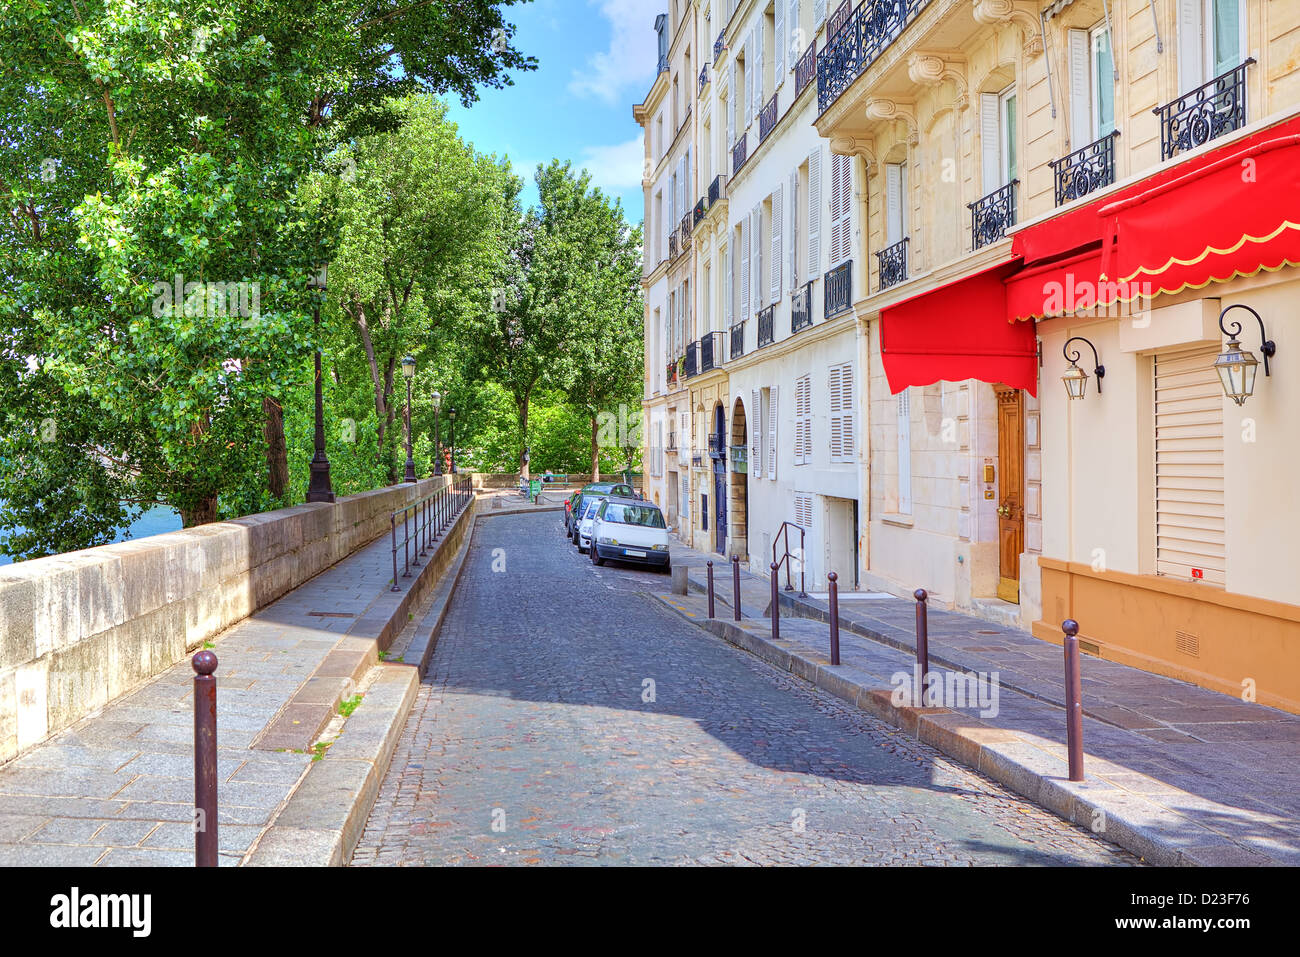 Narrow cobbled street in front of typical parisian building in Paris, France. Stock Photo